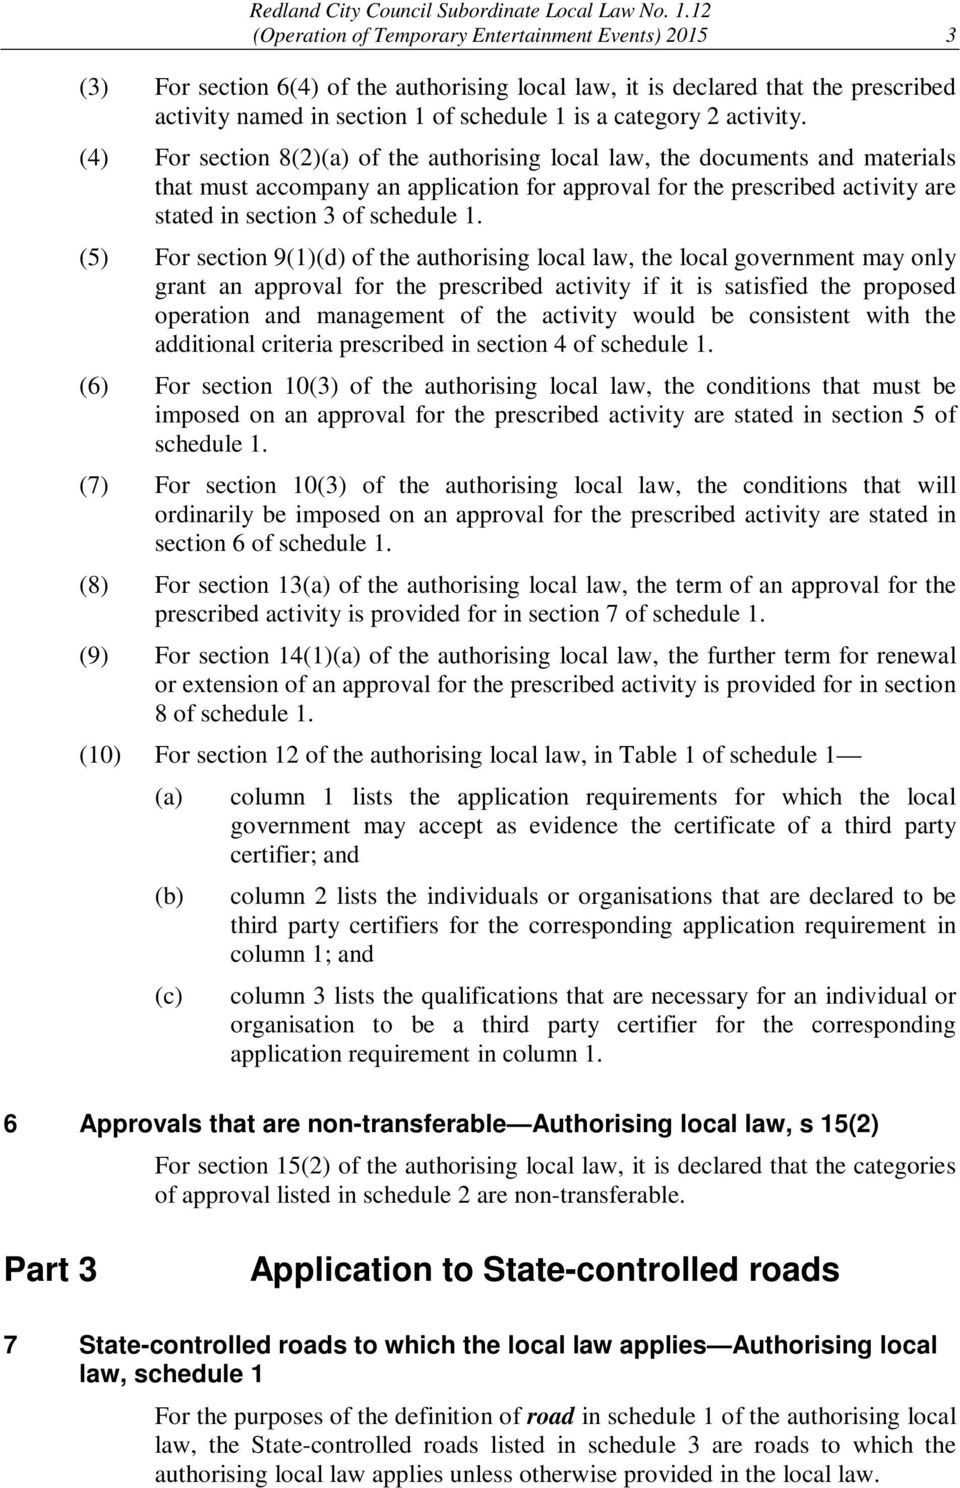 (4) For section 8(2)(a) of the authorising local law, the documents and materials that must accompany an application for approval for the prescribed activity are stated in section 3 of schedule 1.